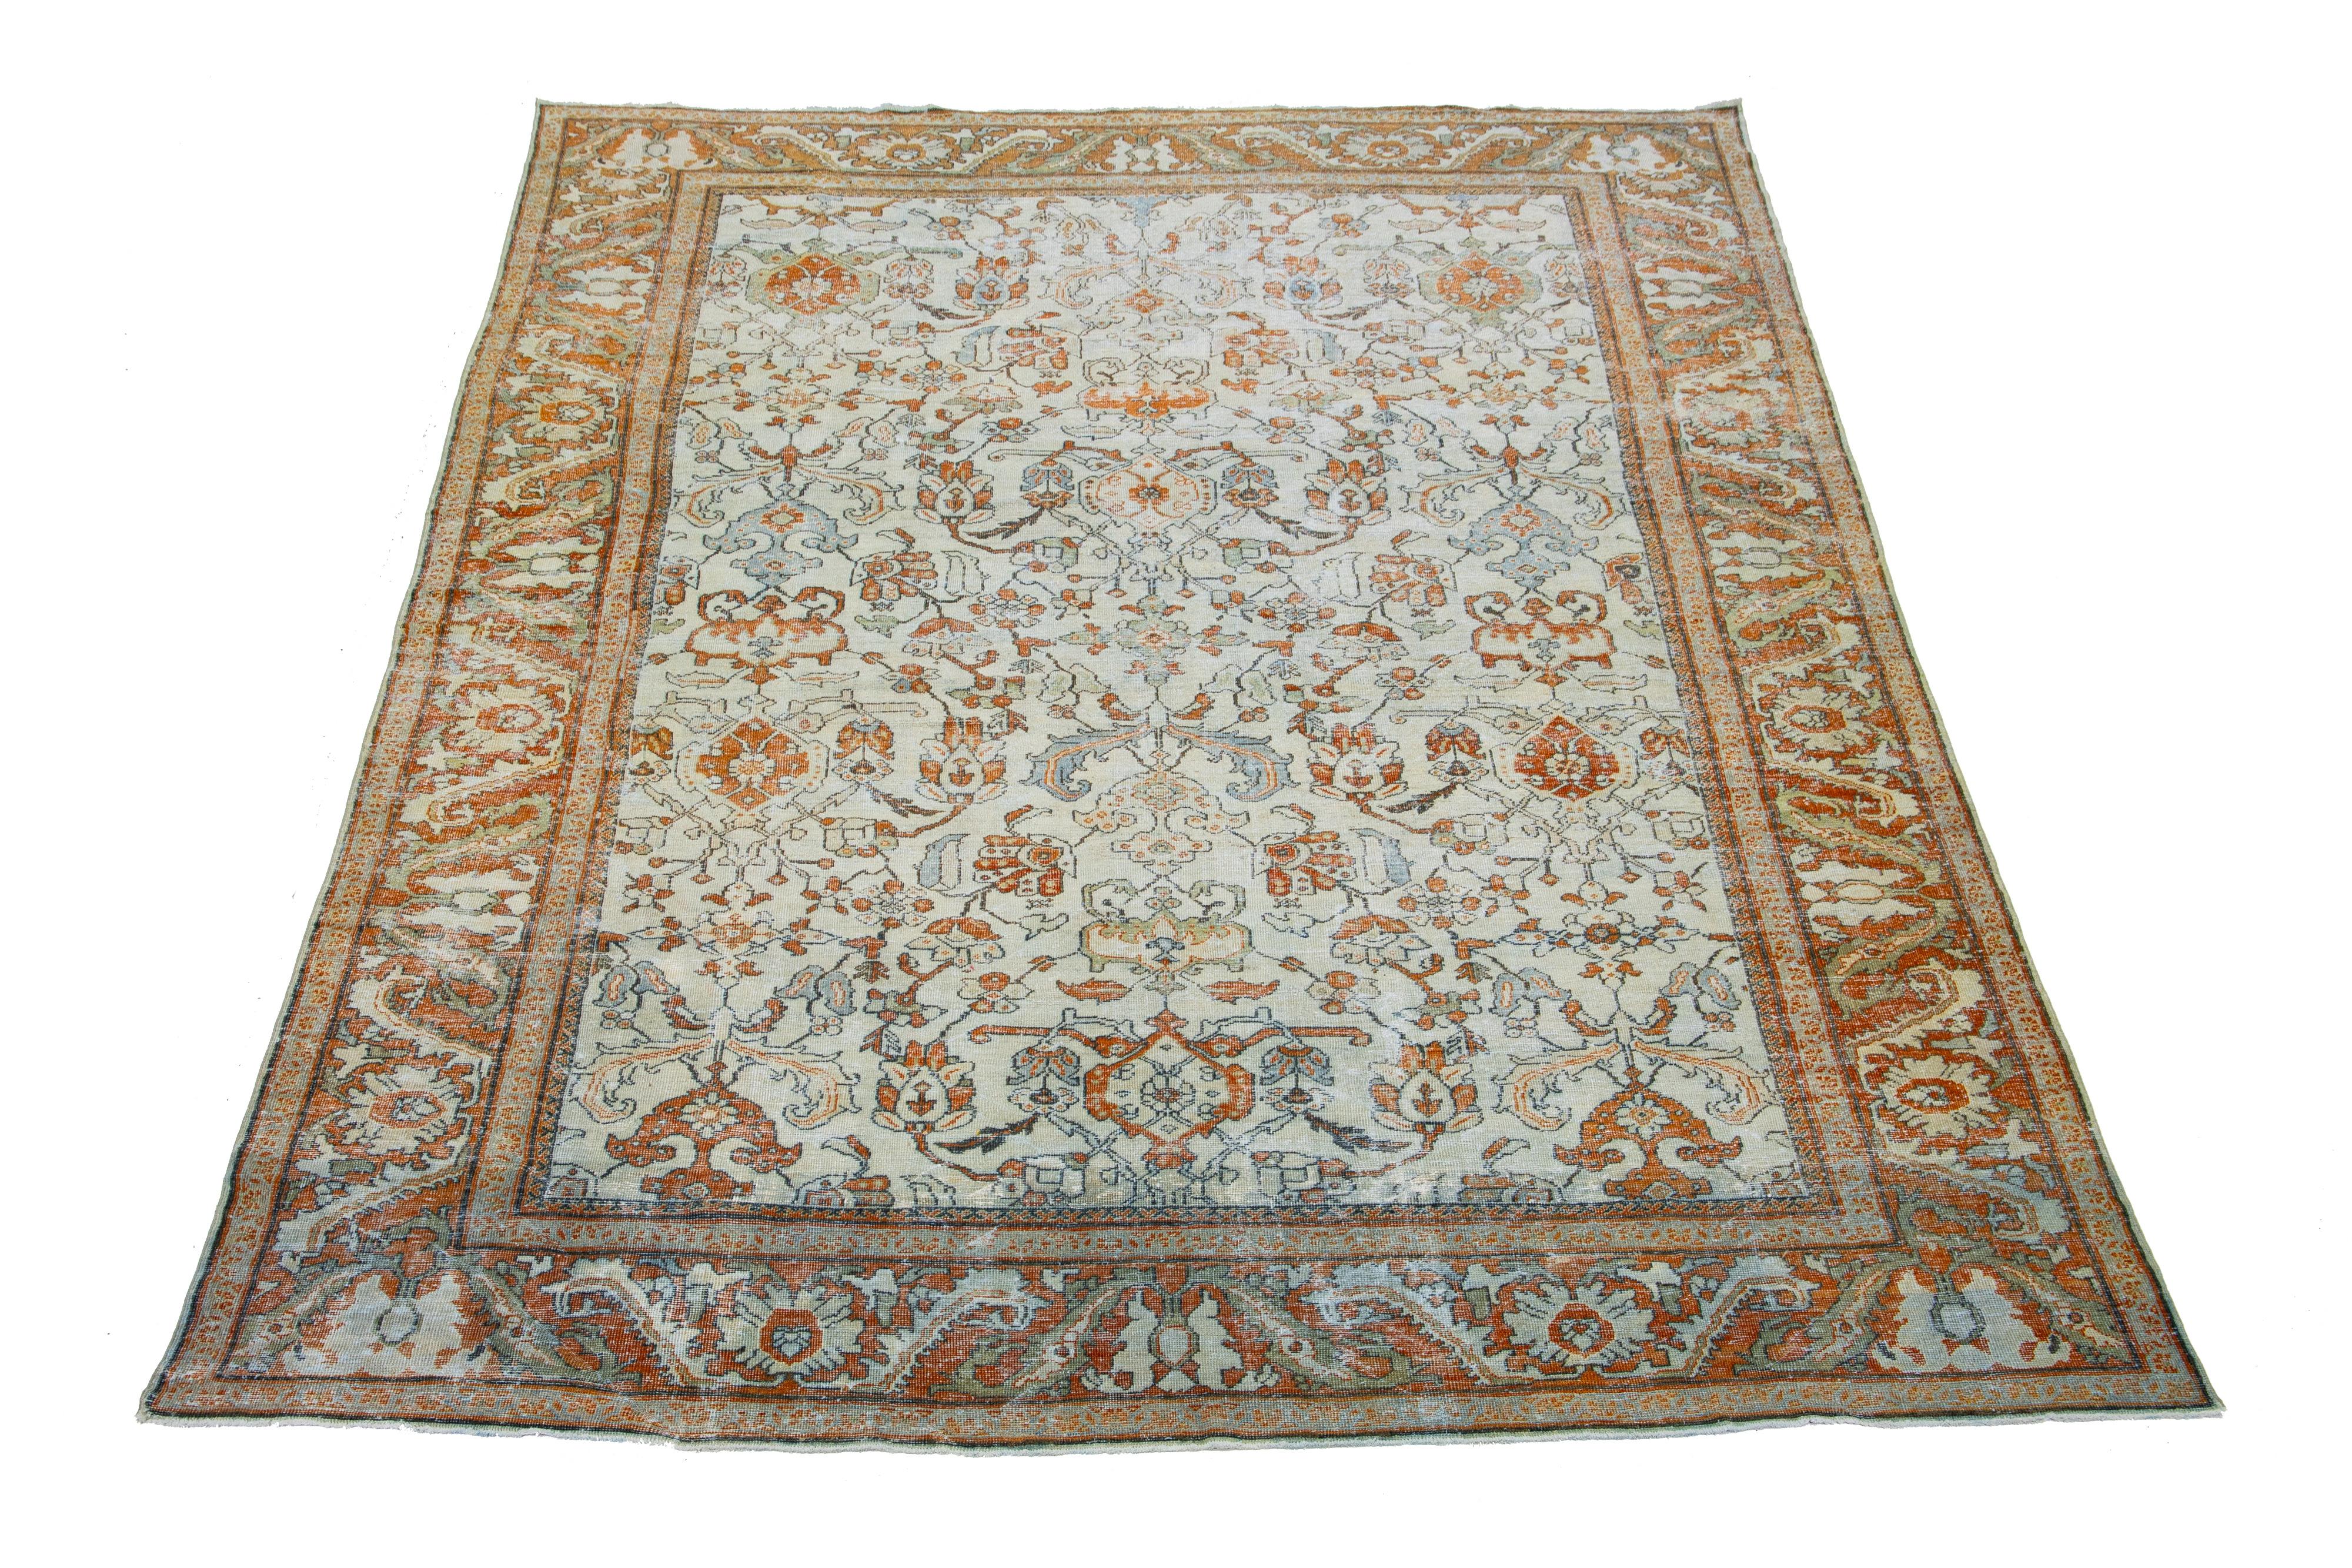 Beautiful antique Persian Mahal hand-knotted wool rug with a beige field. This piece has an orange-designed frame with gray accents in a gorgeous all-over floral design.

This rug measures 10'8